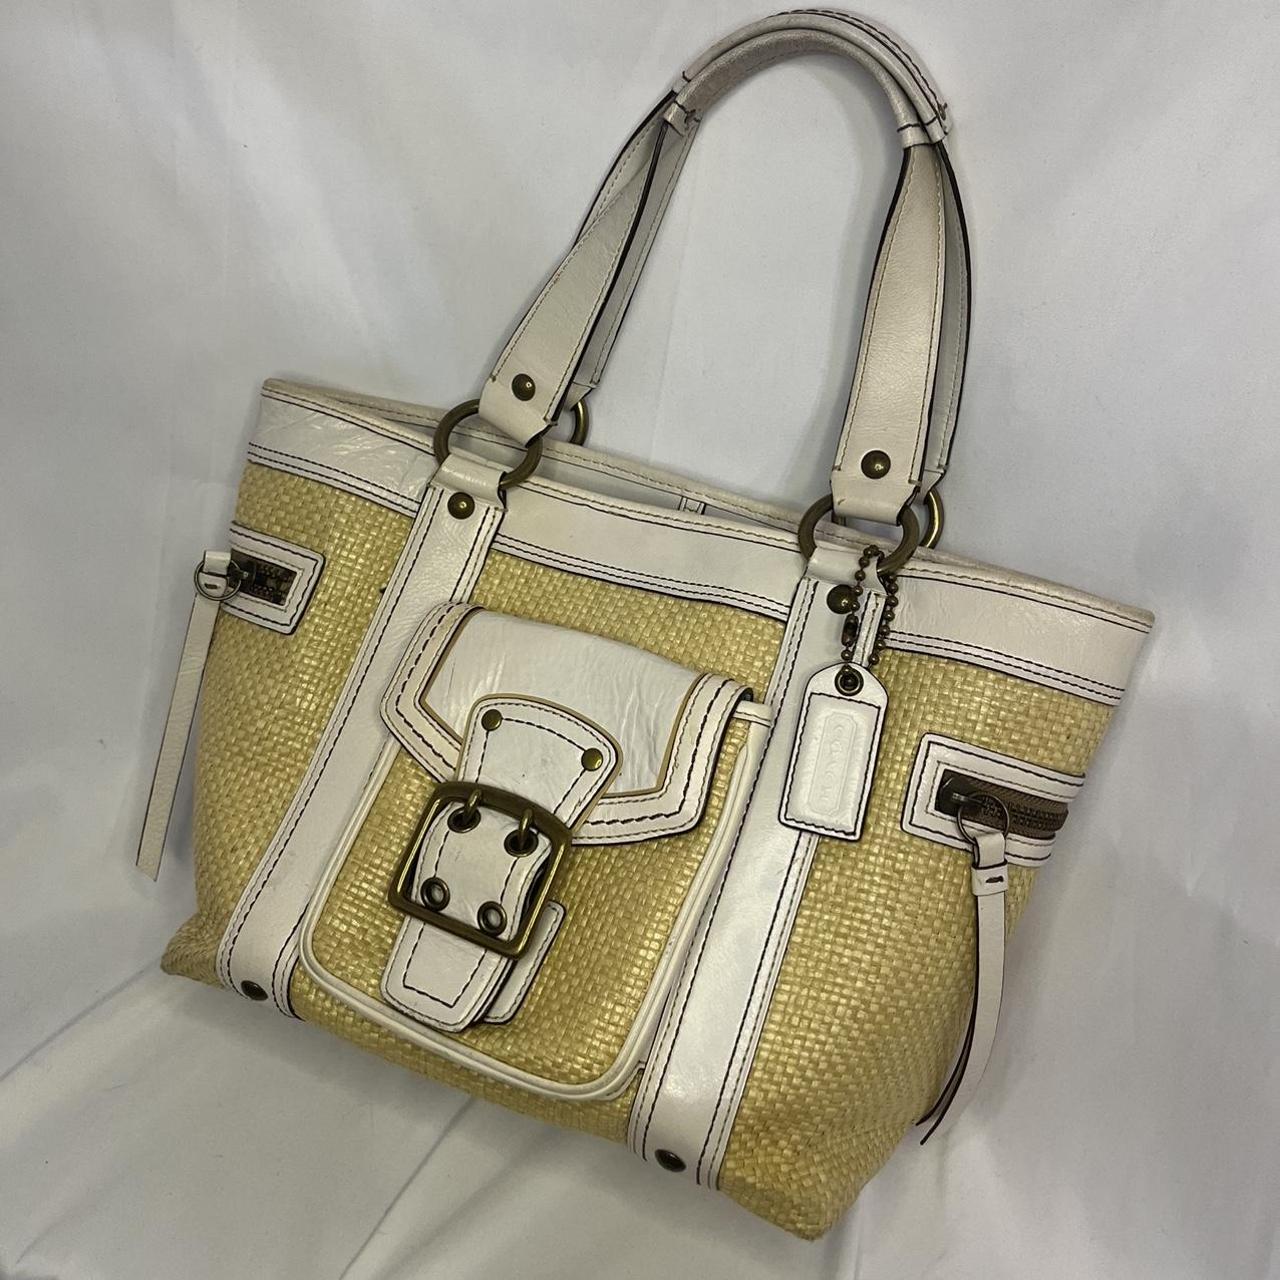 White coach purse in great condition - Depop